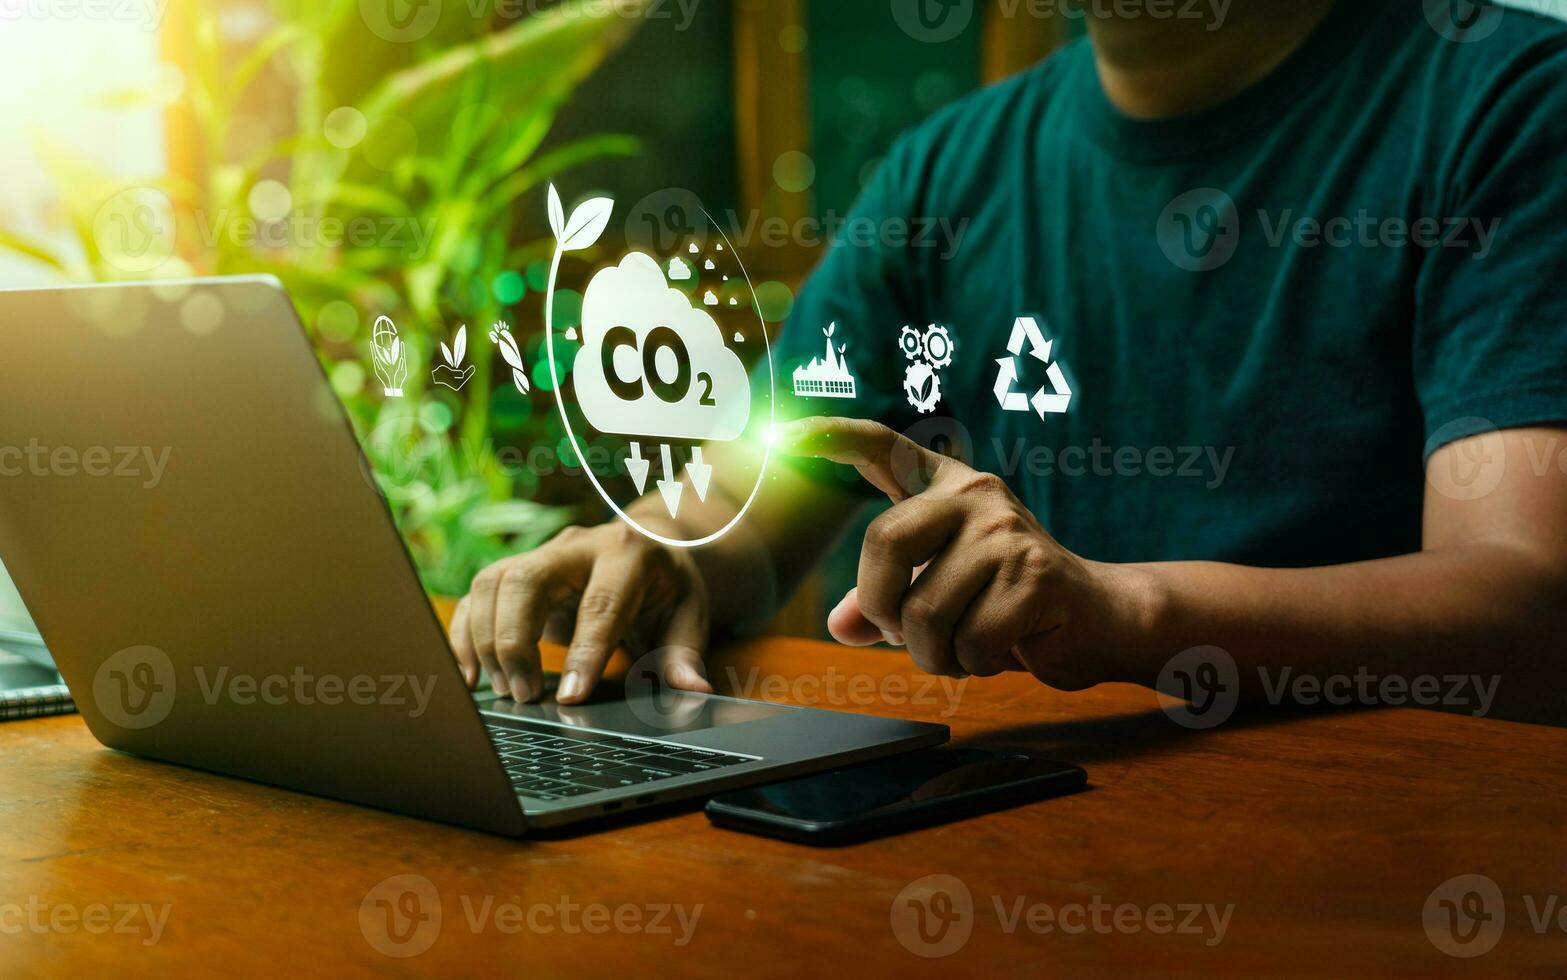 Reduce Co2 Emissions concepts, Global Warming, and Climate Change Energy Conservation, Sustainable Development, Earth Day. Long-term sustainability and societal impact, No toxic gases photo